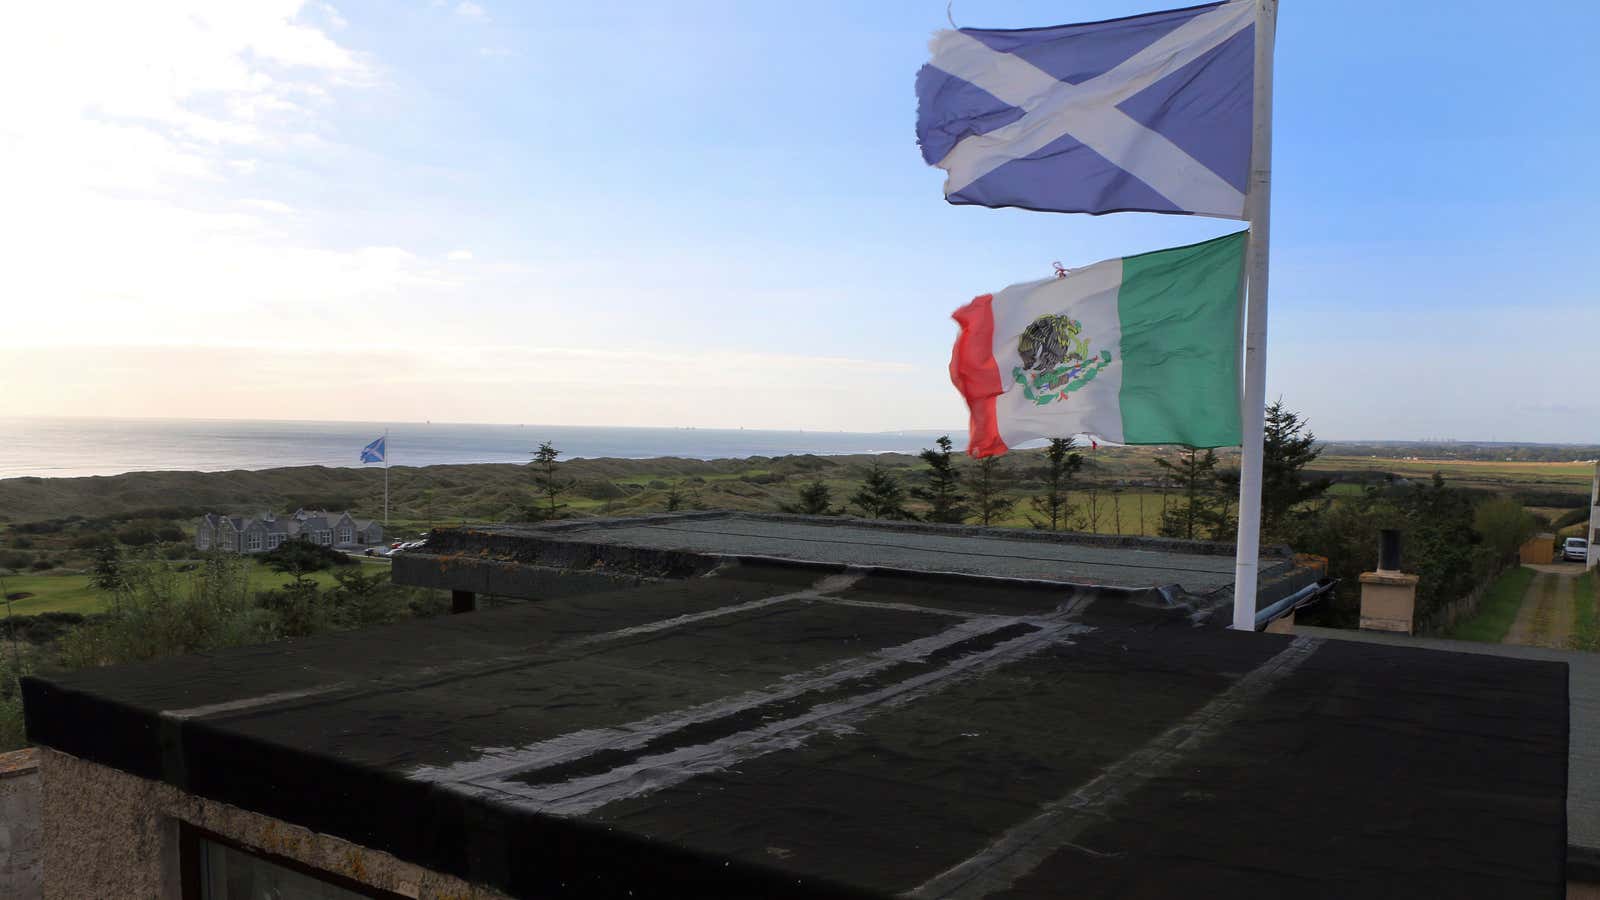 A Scottish homeowner who lives near a Trump golf course flies the Mexican flag.